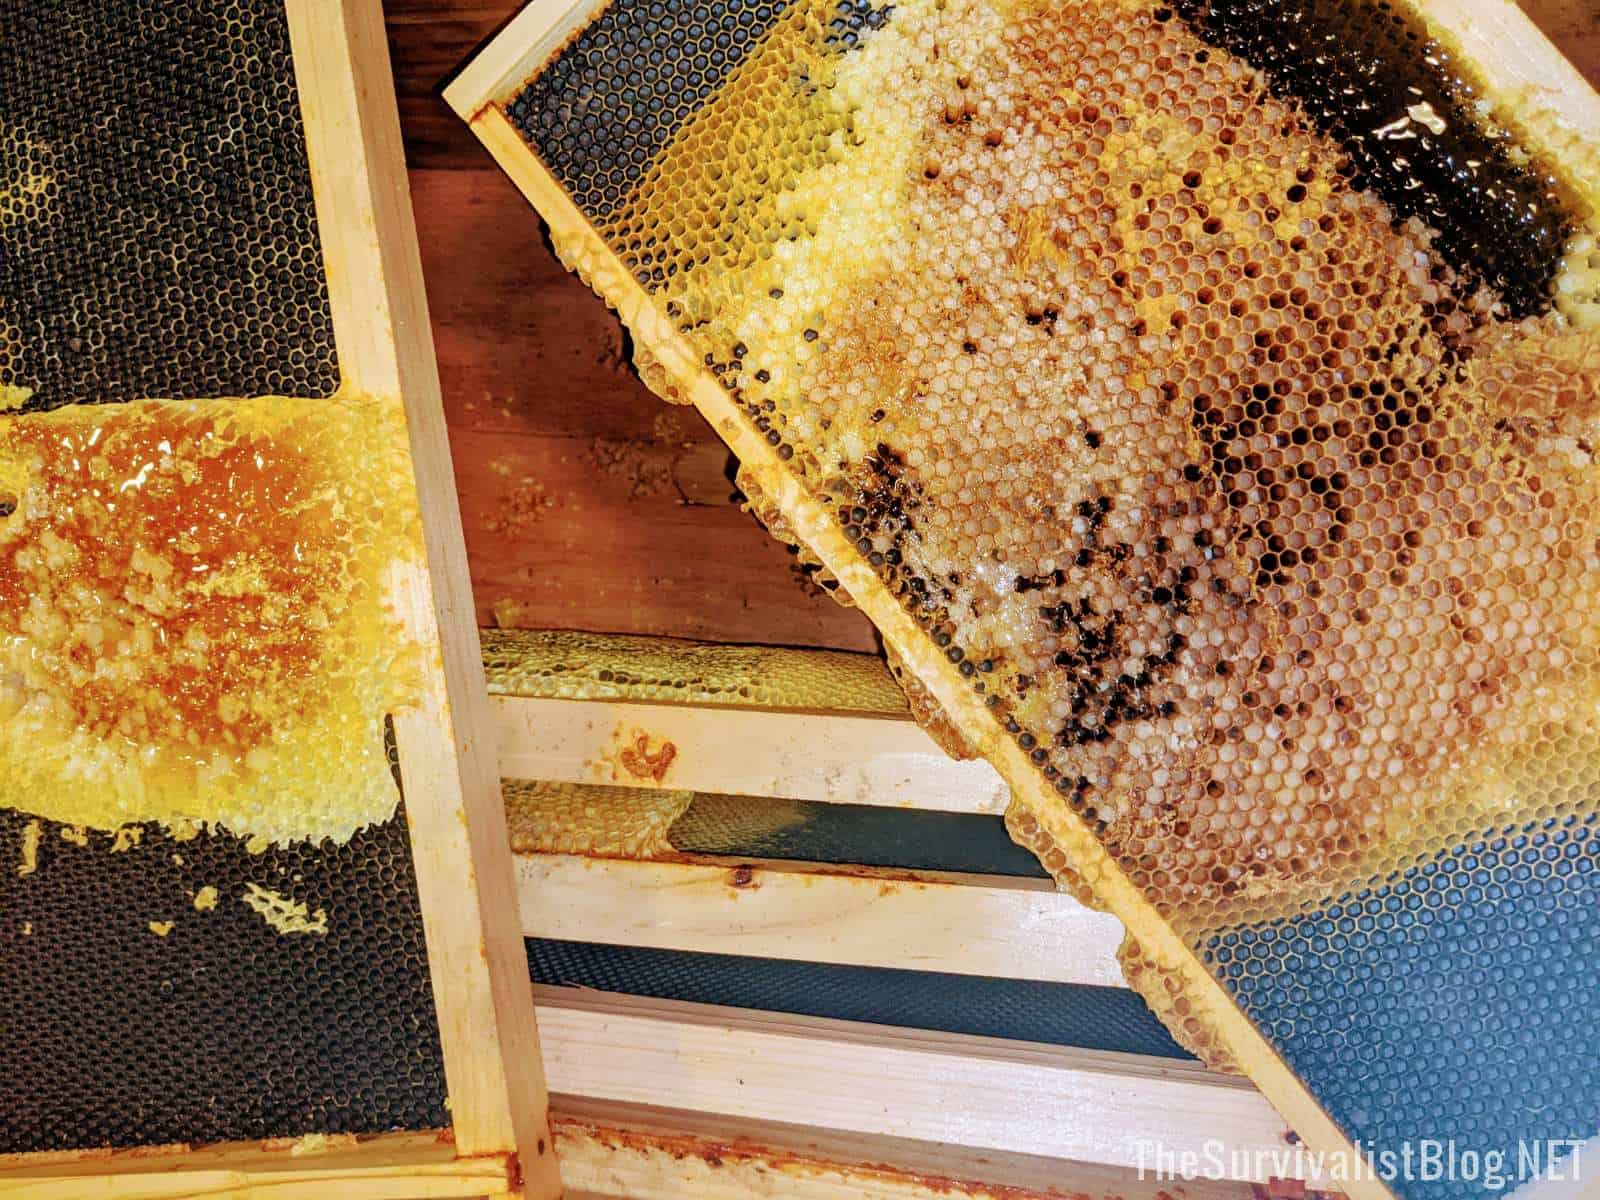 honeycombs and beehive frames on top of open beehive